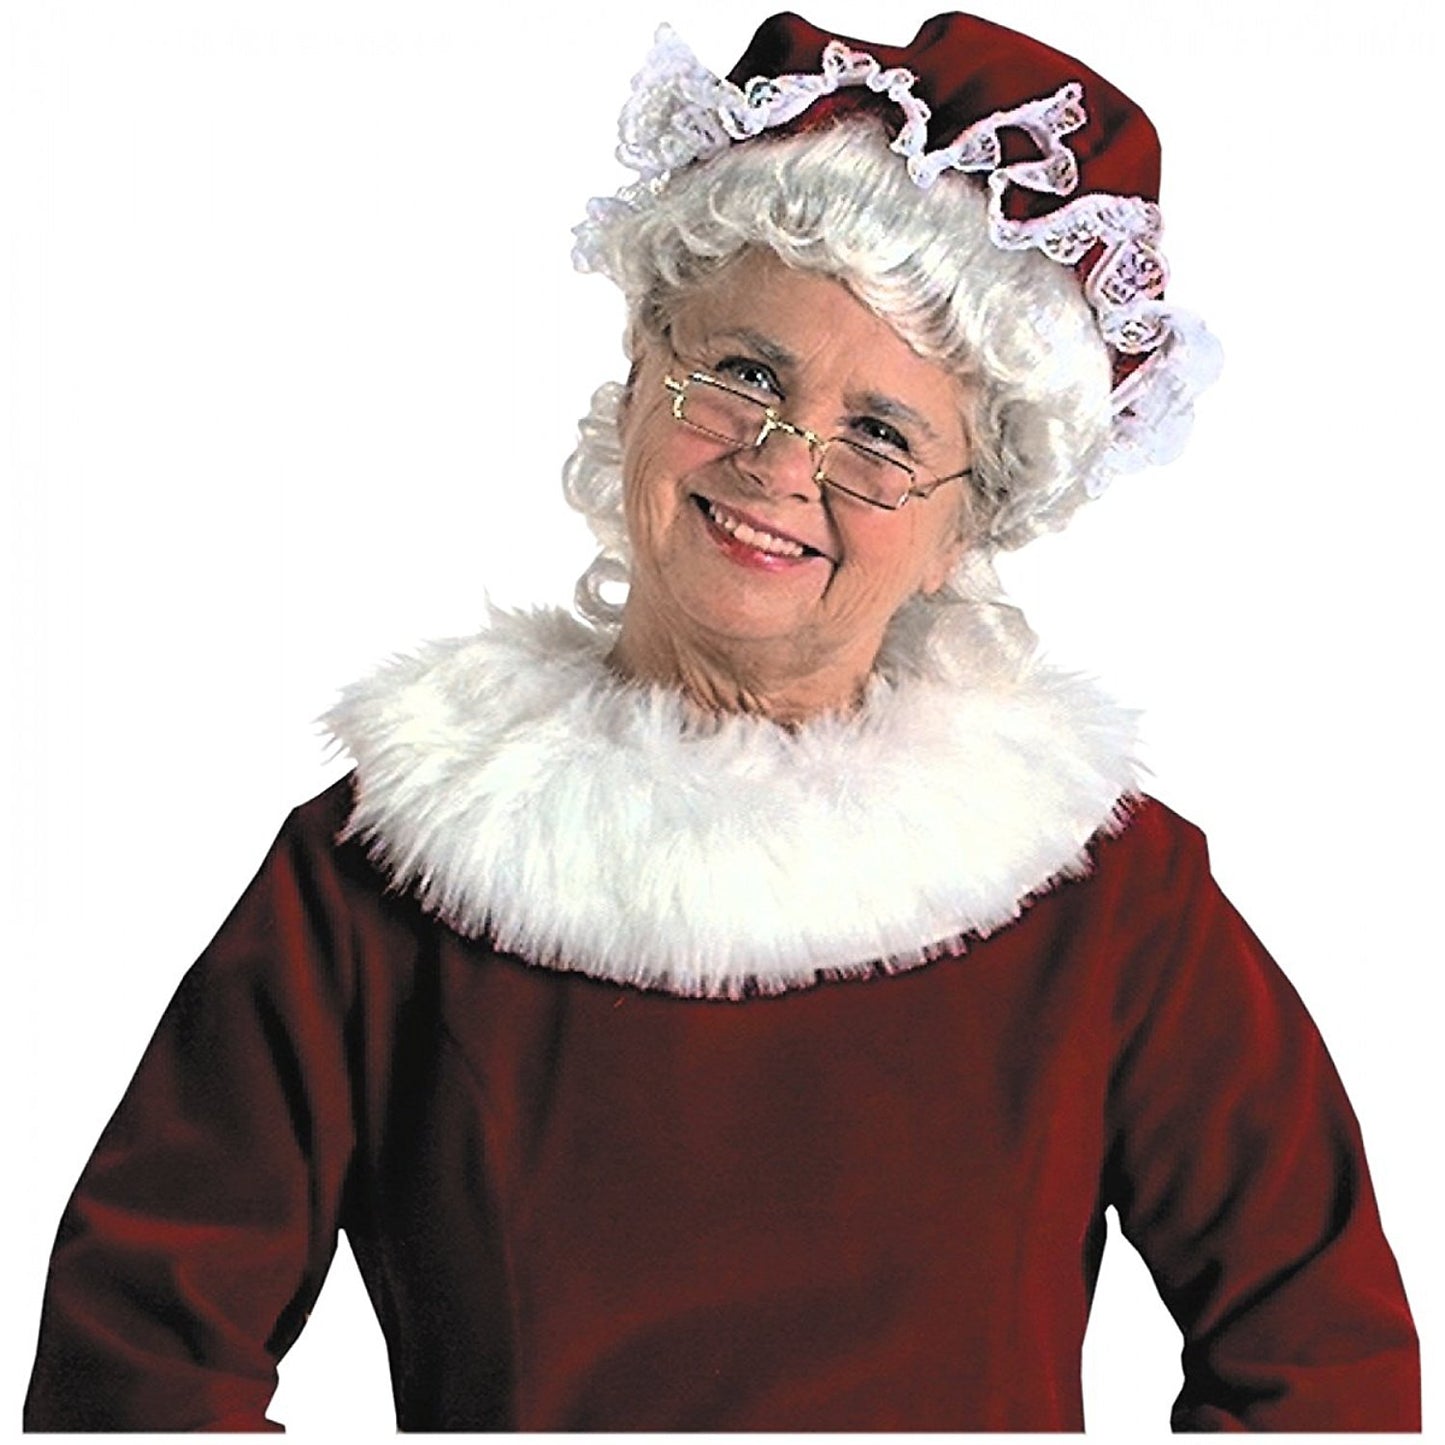 Mrs. Santa Mop Hat - Colonial - Christmas - Costume Accessory - 2 Colors